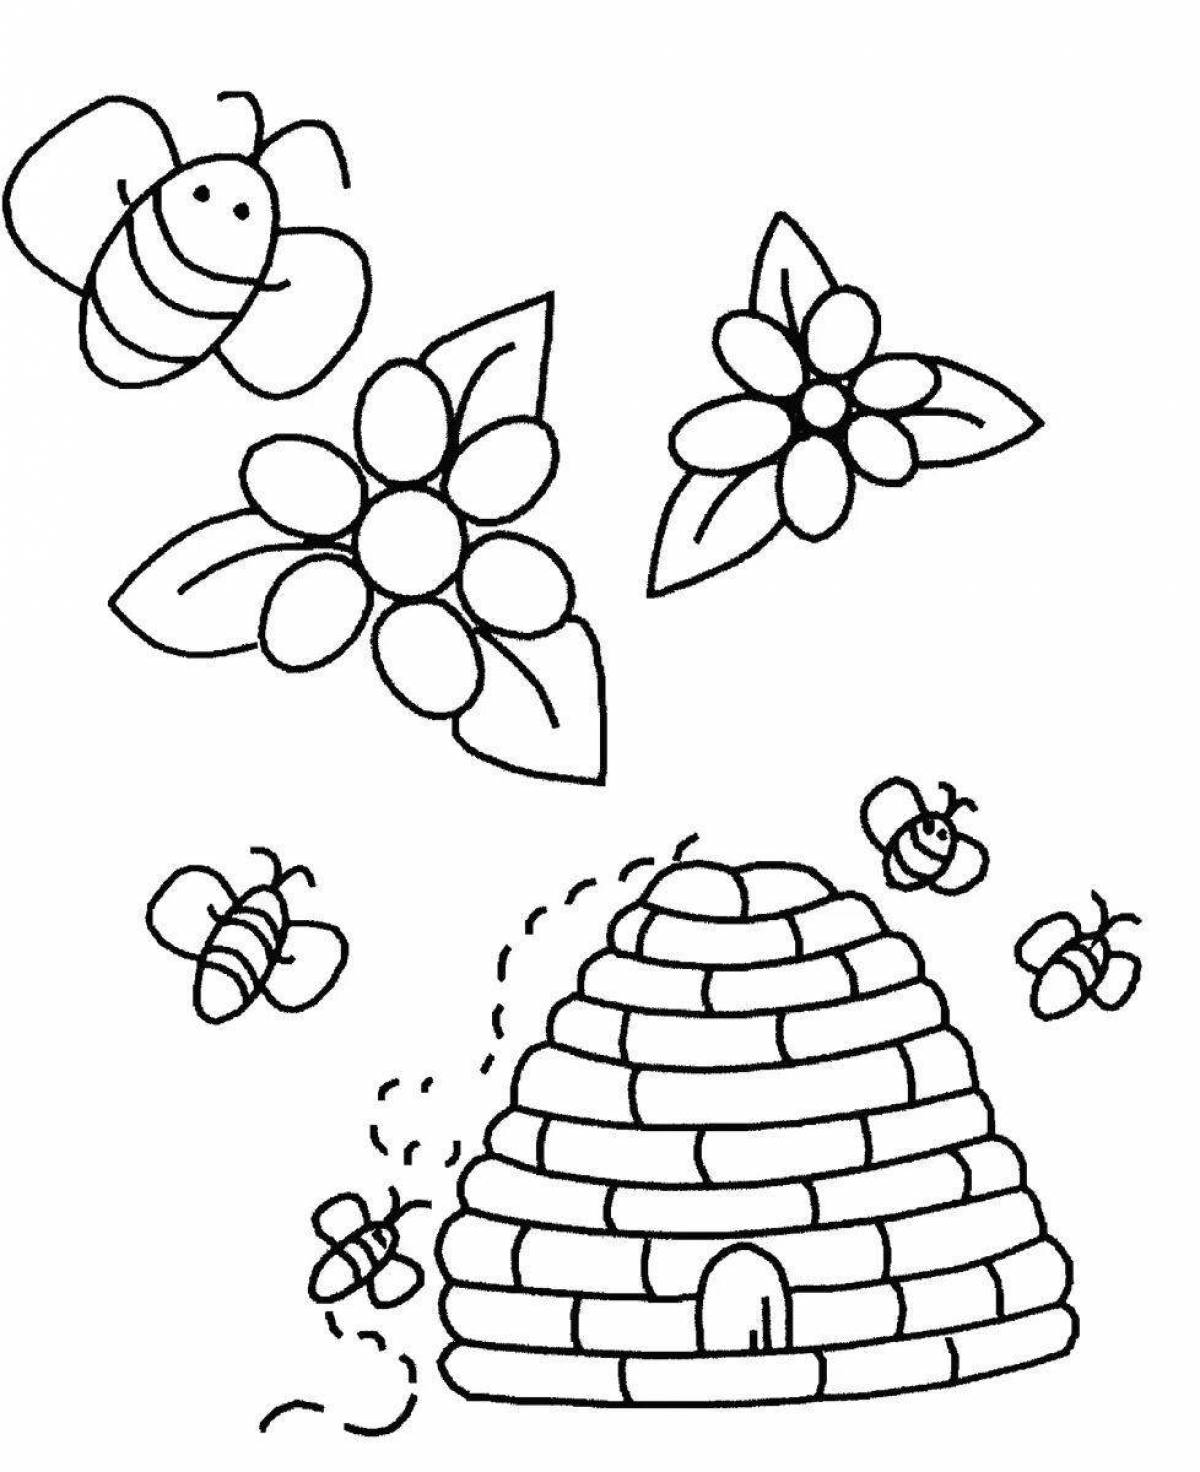 Adorable beehive coloring book for kids